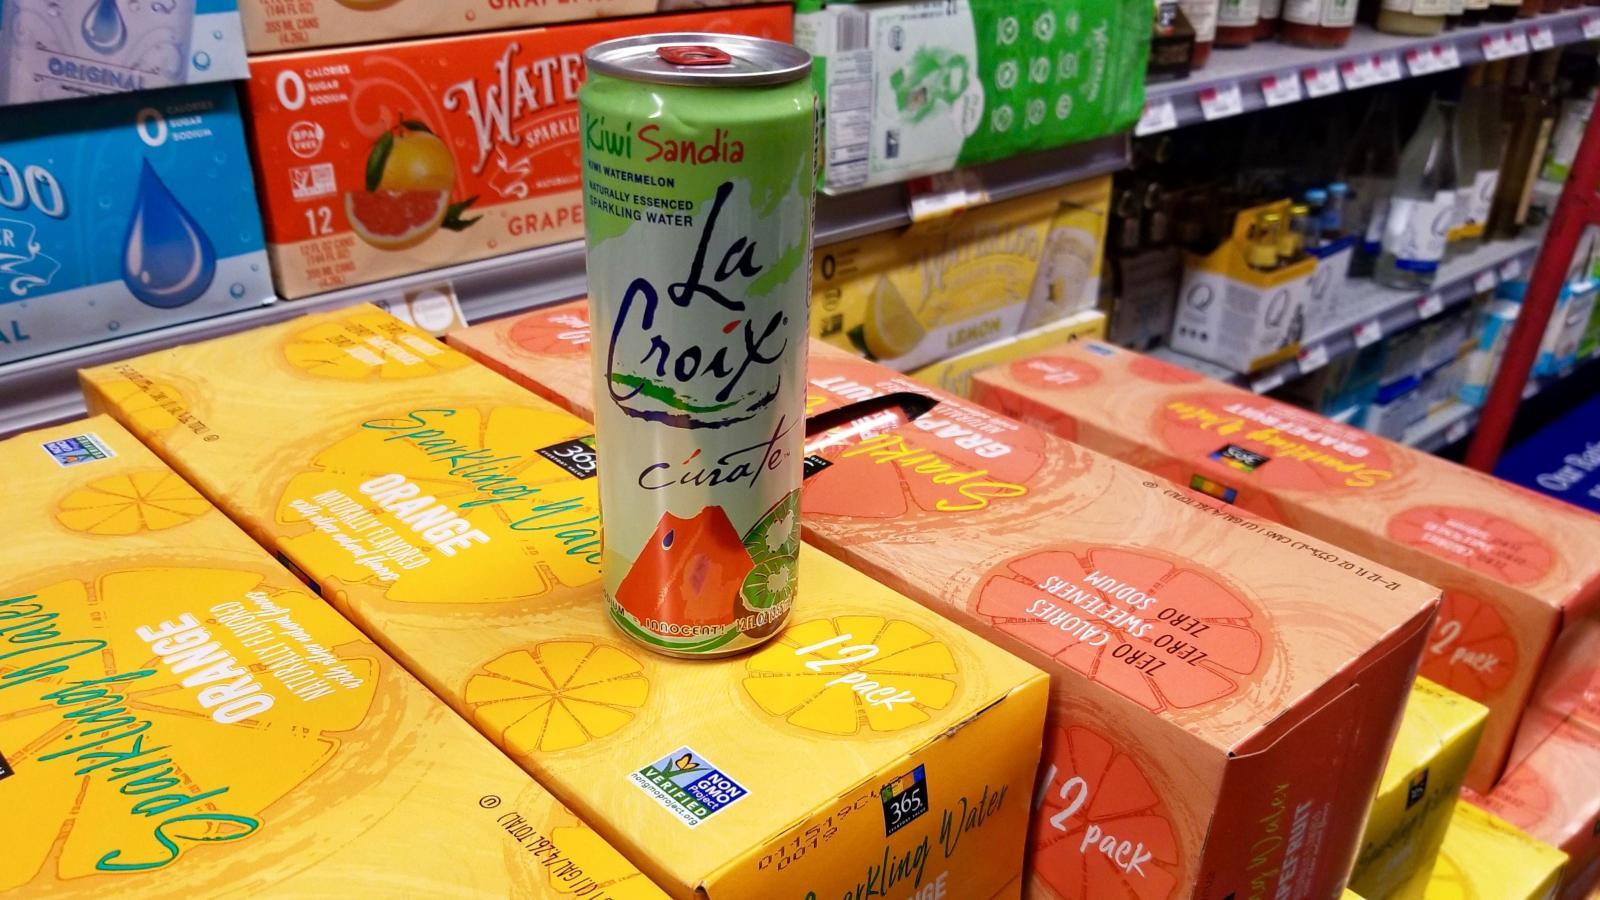 Amazon is challenging LaCroix with 365 sparkling water at Whole